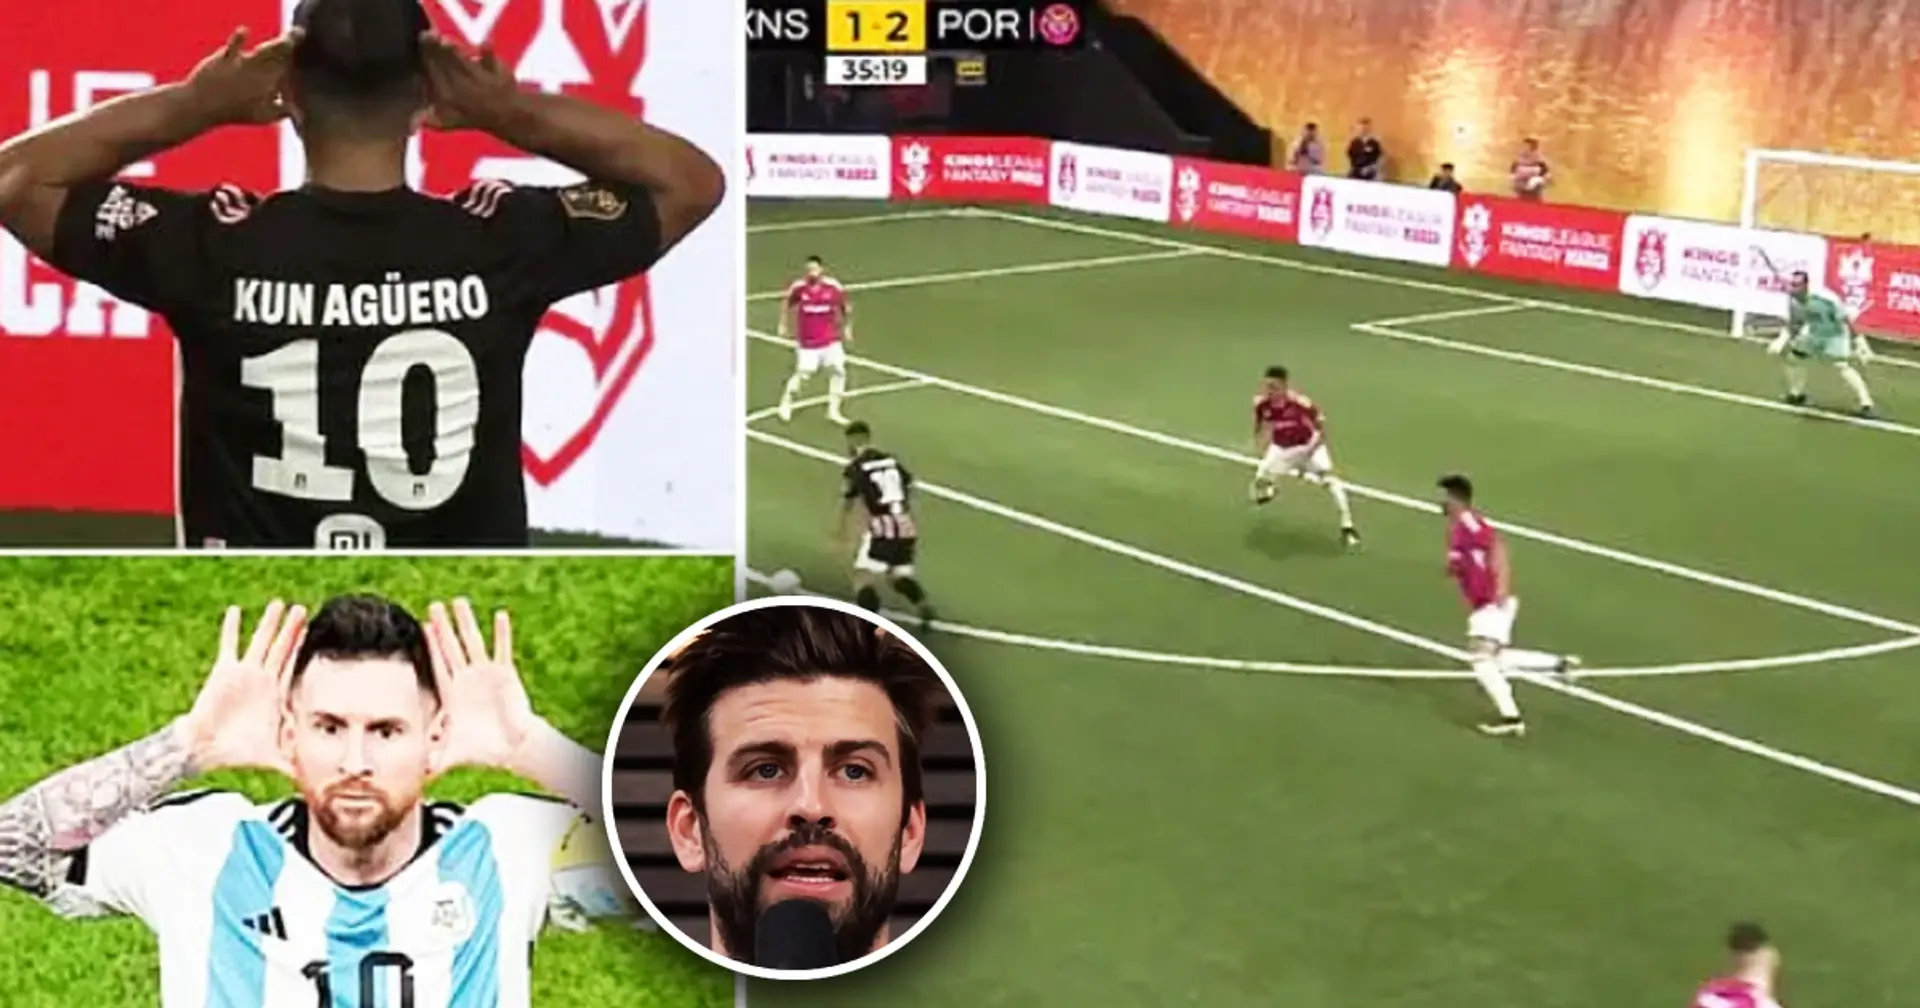 Aguero hits Messi's iconic celebration after scoring in Pique's Kings League